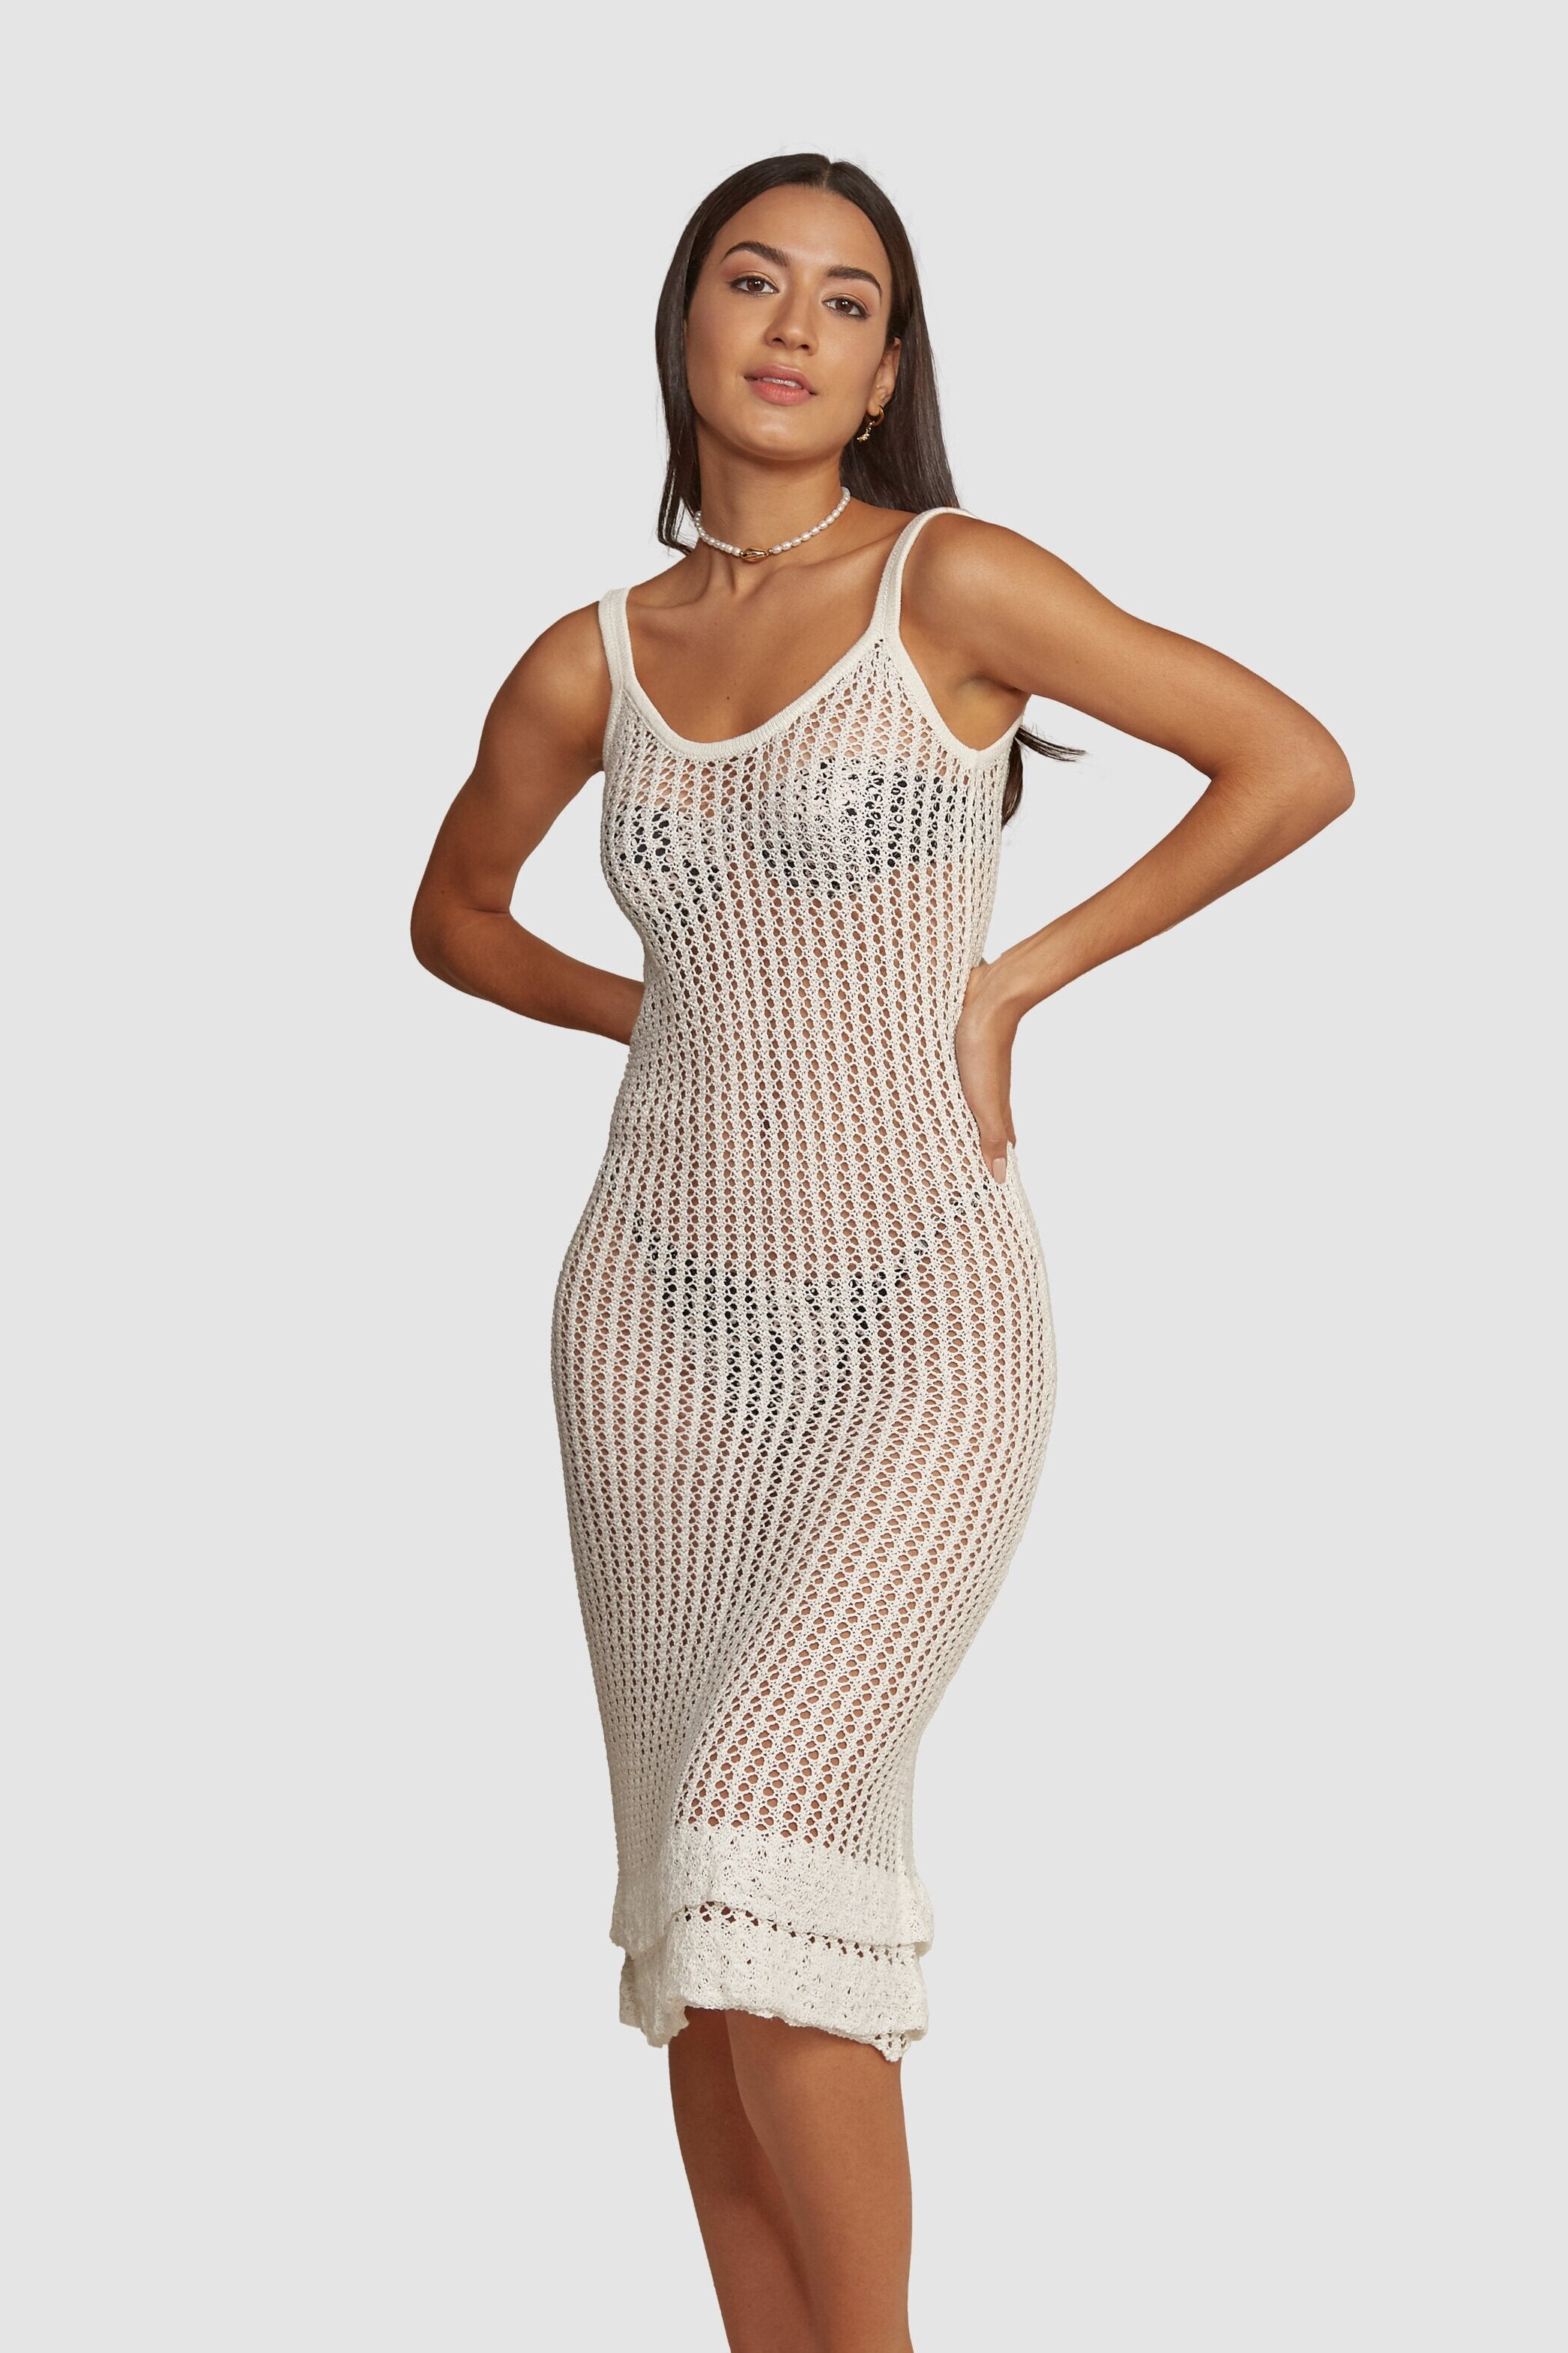 Aldana is a cami style dress designed to subtly hug the body, flattering all figures. A go-to cover-up that is easily dressed up or down. Features a double hem detail. Handmade crochet by Peruvian artisans. 100% cotton. Made in Peru.